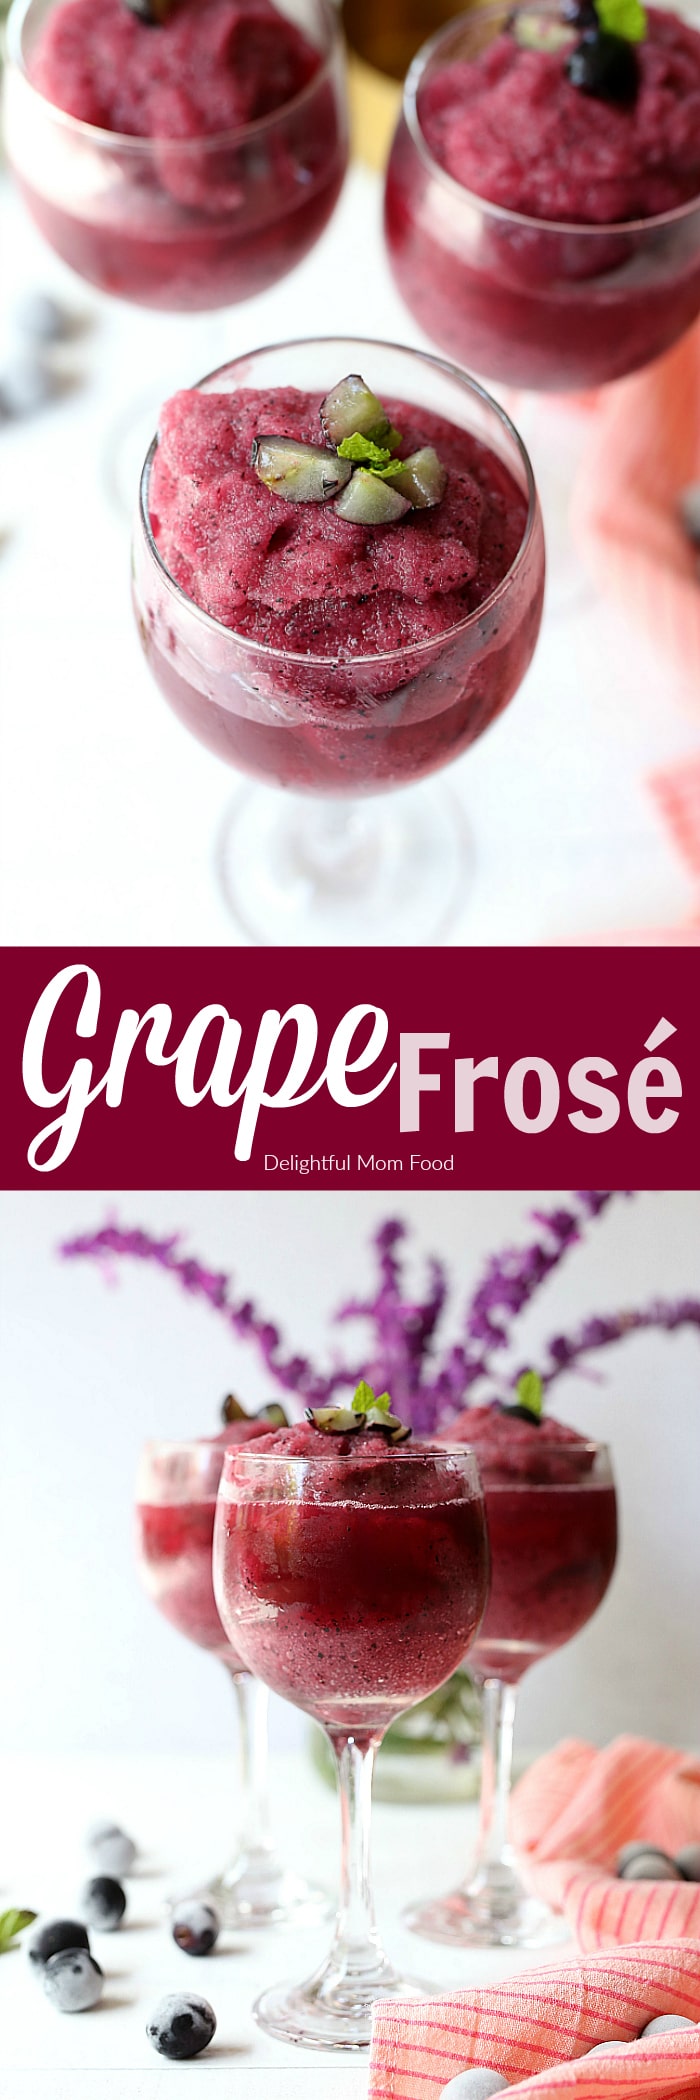 Grape Frosé Rosé (Frozen Rosé)- a refreshing blend of frozen grapes with rosé wine! Enjoy this trendy summer alcoholic beverage at your next party or BBQ to serve a large crowd! Summer’s all-time hit cocktails are Frozen Rosé along with enjoying a chilled glass of Rosé wine all day (Rosé All Day Babeee!)! This fruity alcoholic beverage has grown in popularity for its refreshing slushy texture of frozen fruit blended with rosé wine. #frozen #FroséRosé #frozenrosé #grapes #fruit #cocktails #skinnydrinks #easy #quick #roséallday | Recipe at delightfulmomfood.com